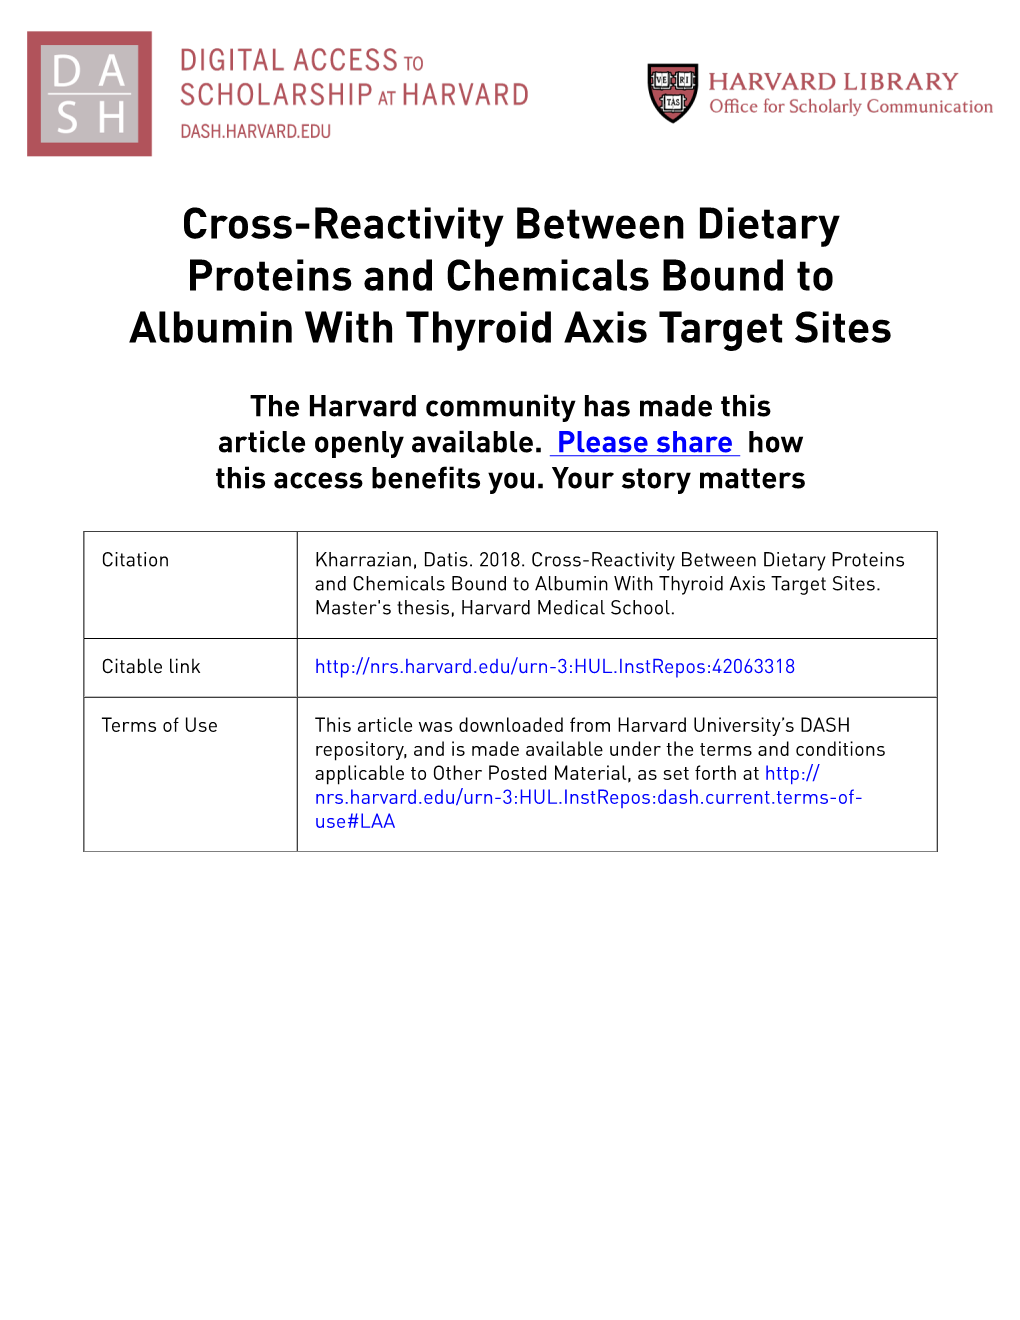 Cross-Reactivity Between Dietary Proteins and Chemicals Bound to Albumin with Thyroid Axis Target Sites